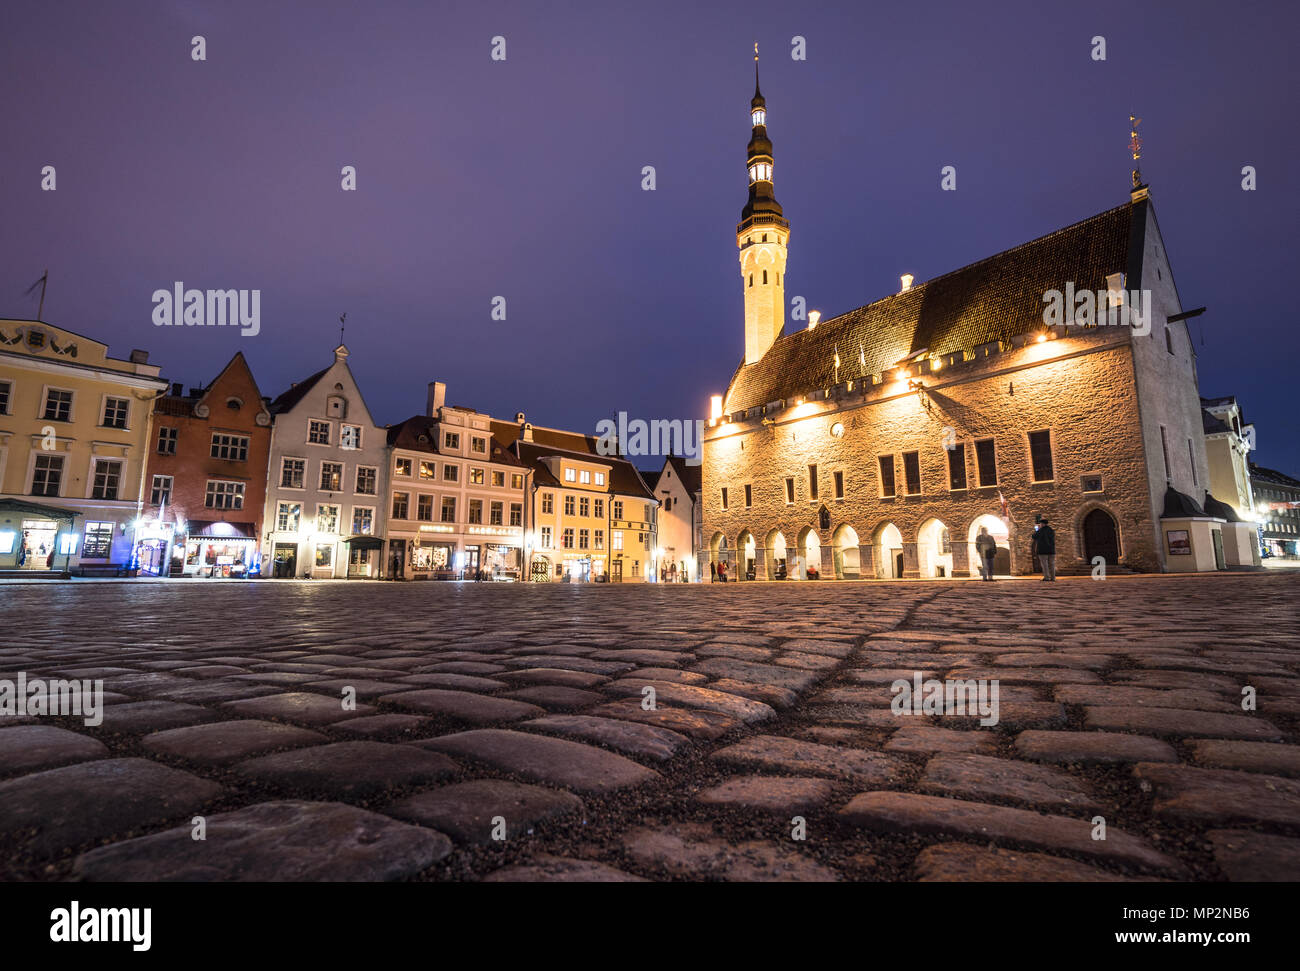 The Tallin gothic Town Hall building on the main old town square at night in Estonia capital city in winter. Tallinn is a popular travel destination i Stock Photo